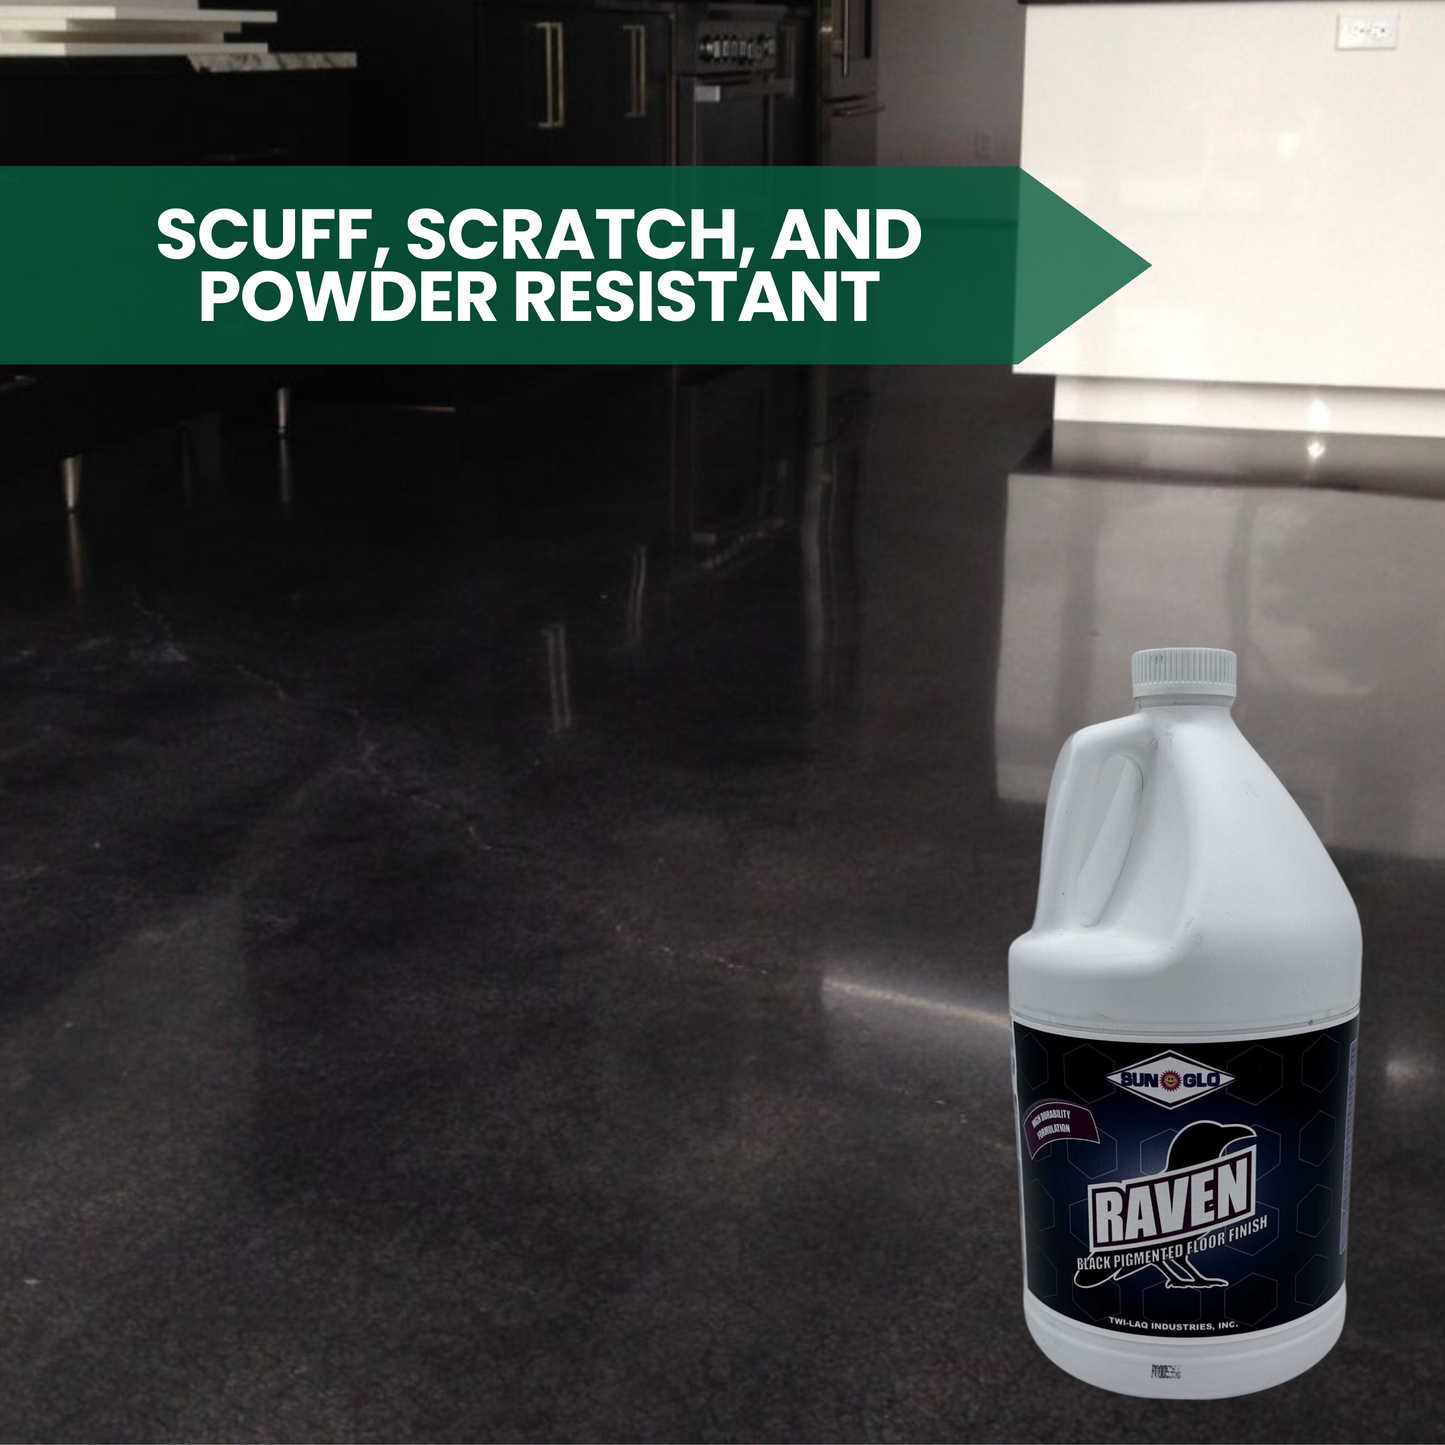 SUN-GLO Raven Black Pigmented Floor Finish | Commercial and Industrial Flooring Protection | Glossy Black Flooring Finish | Creates Brilliant Super Gloss Black Finish Surface (1 Gallon)